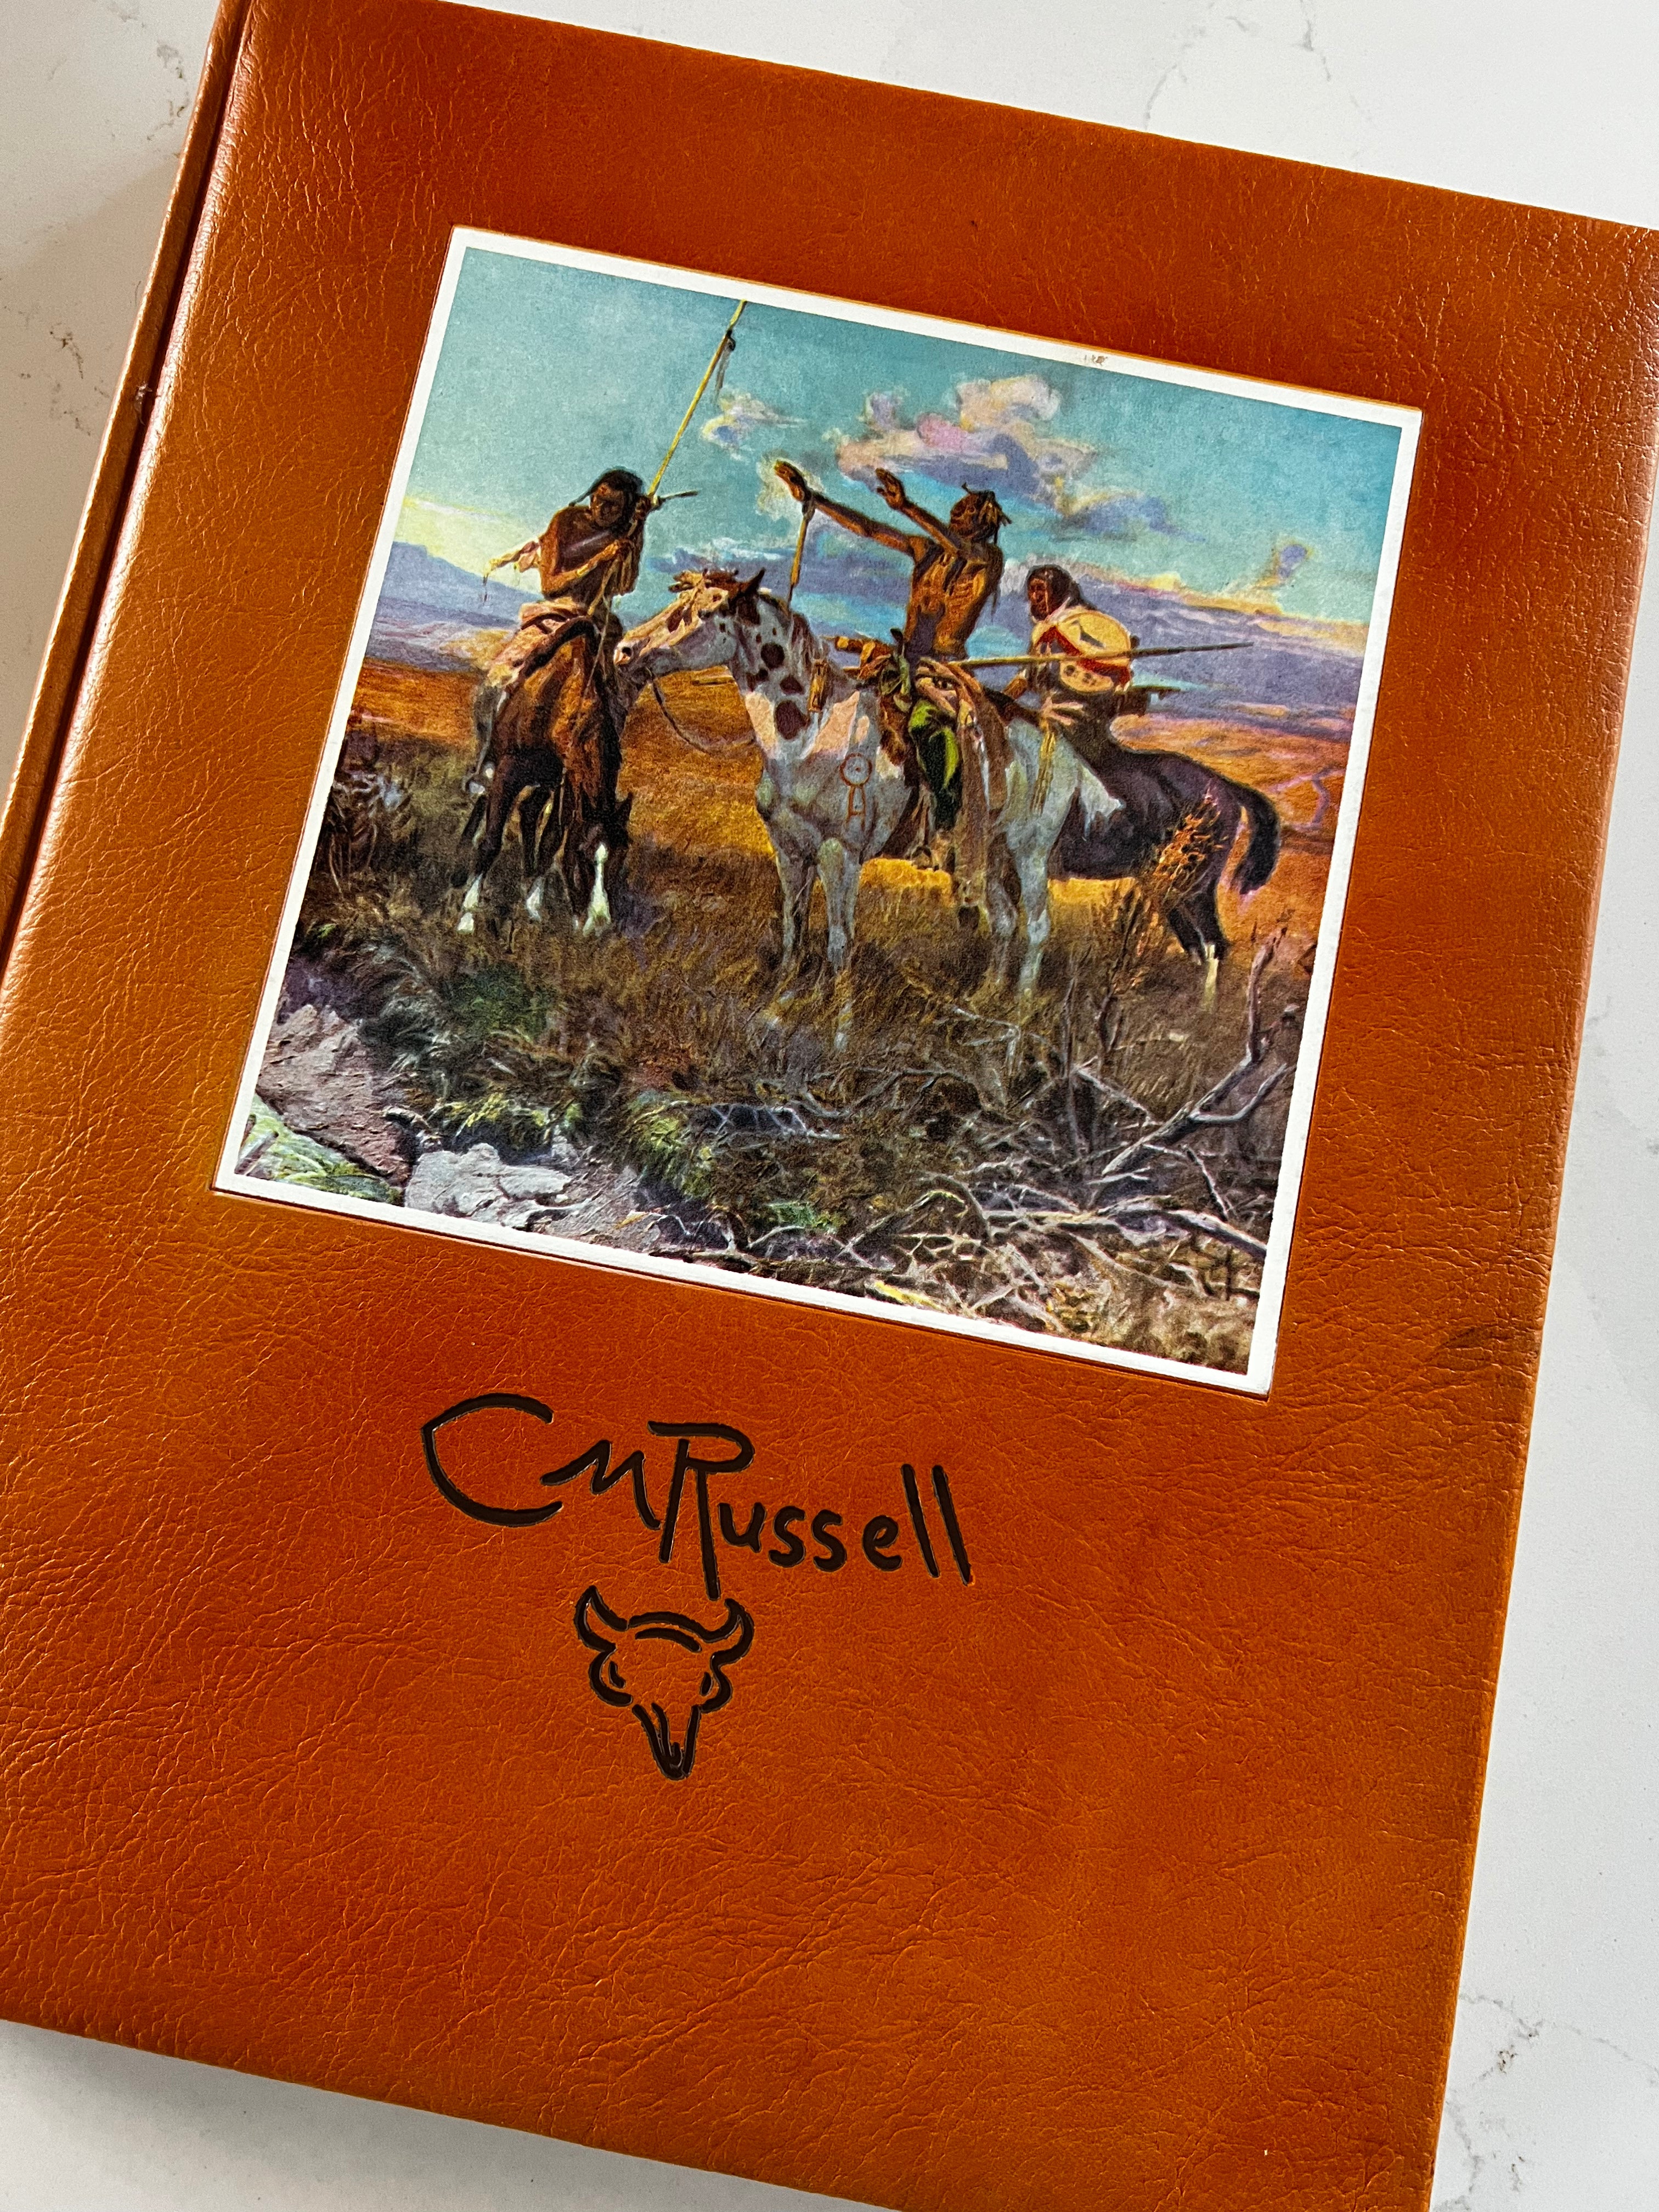 Special Cased Leather Bound Edition of The Charles M Russell Book by Harold McCracken 1957